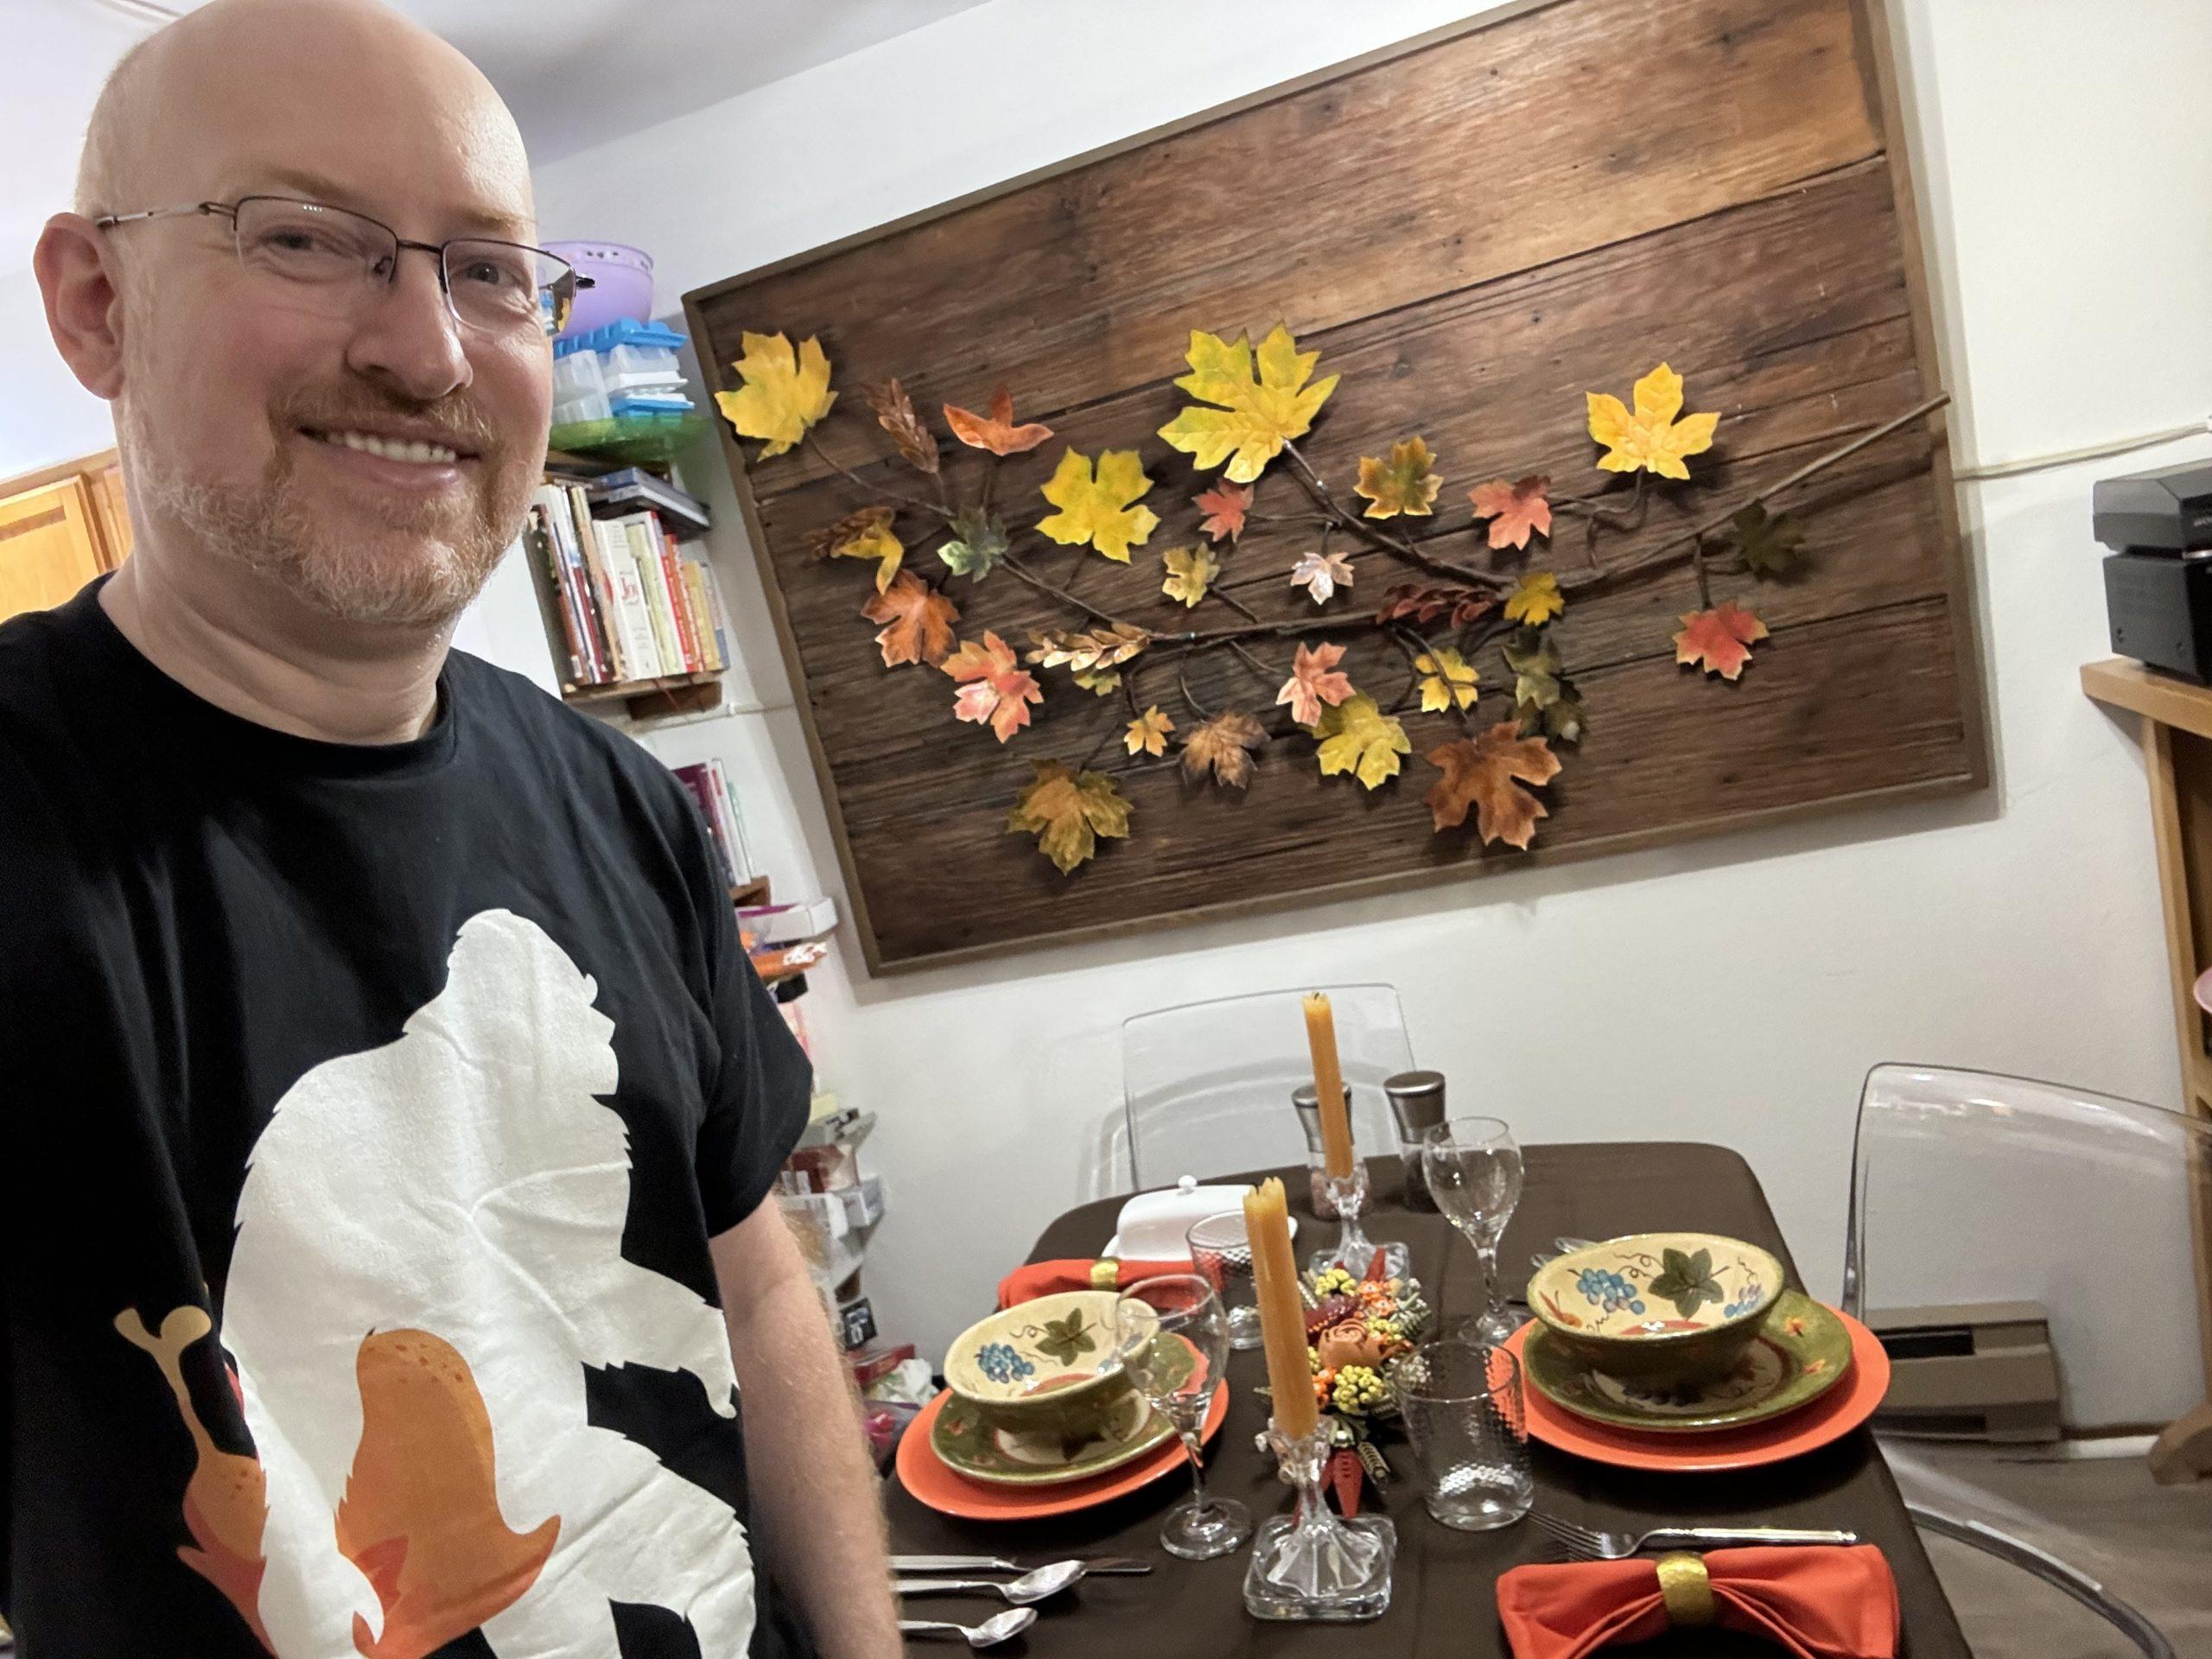 Me in front of a table set for dinner with fall-colored table settings (brown tablecloth, orange dinner plates and napkins, green salad plates and bowls) and yellow candles. There is sculptural artwork on the wall of fall leaves mounted on a wood backing. I'm wearing a black t-shirt with a simple design of Bigfoot carrying a turkey.